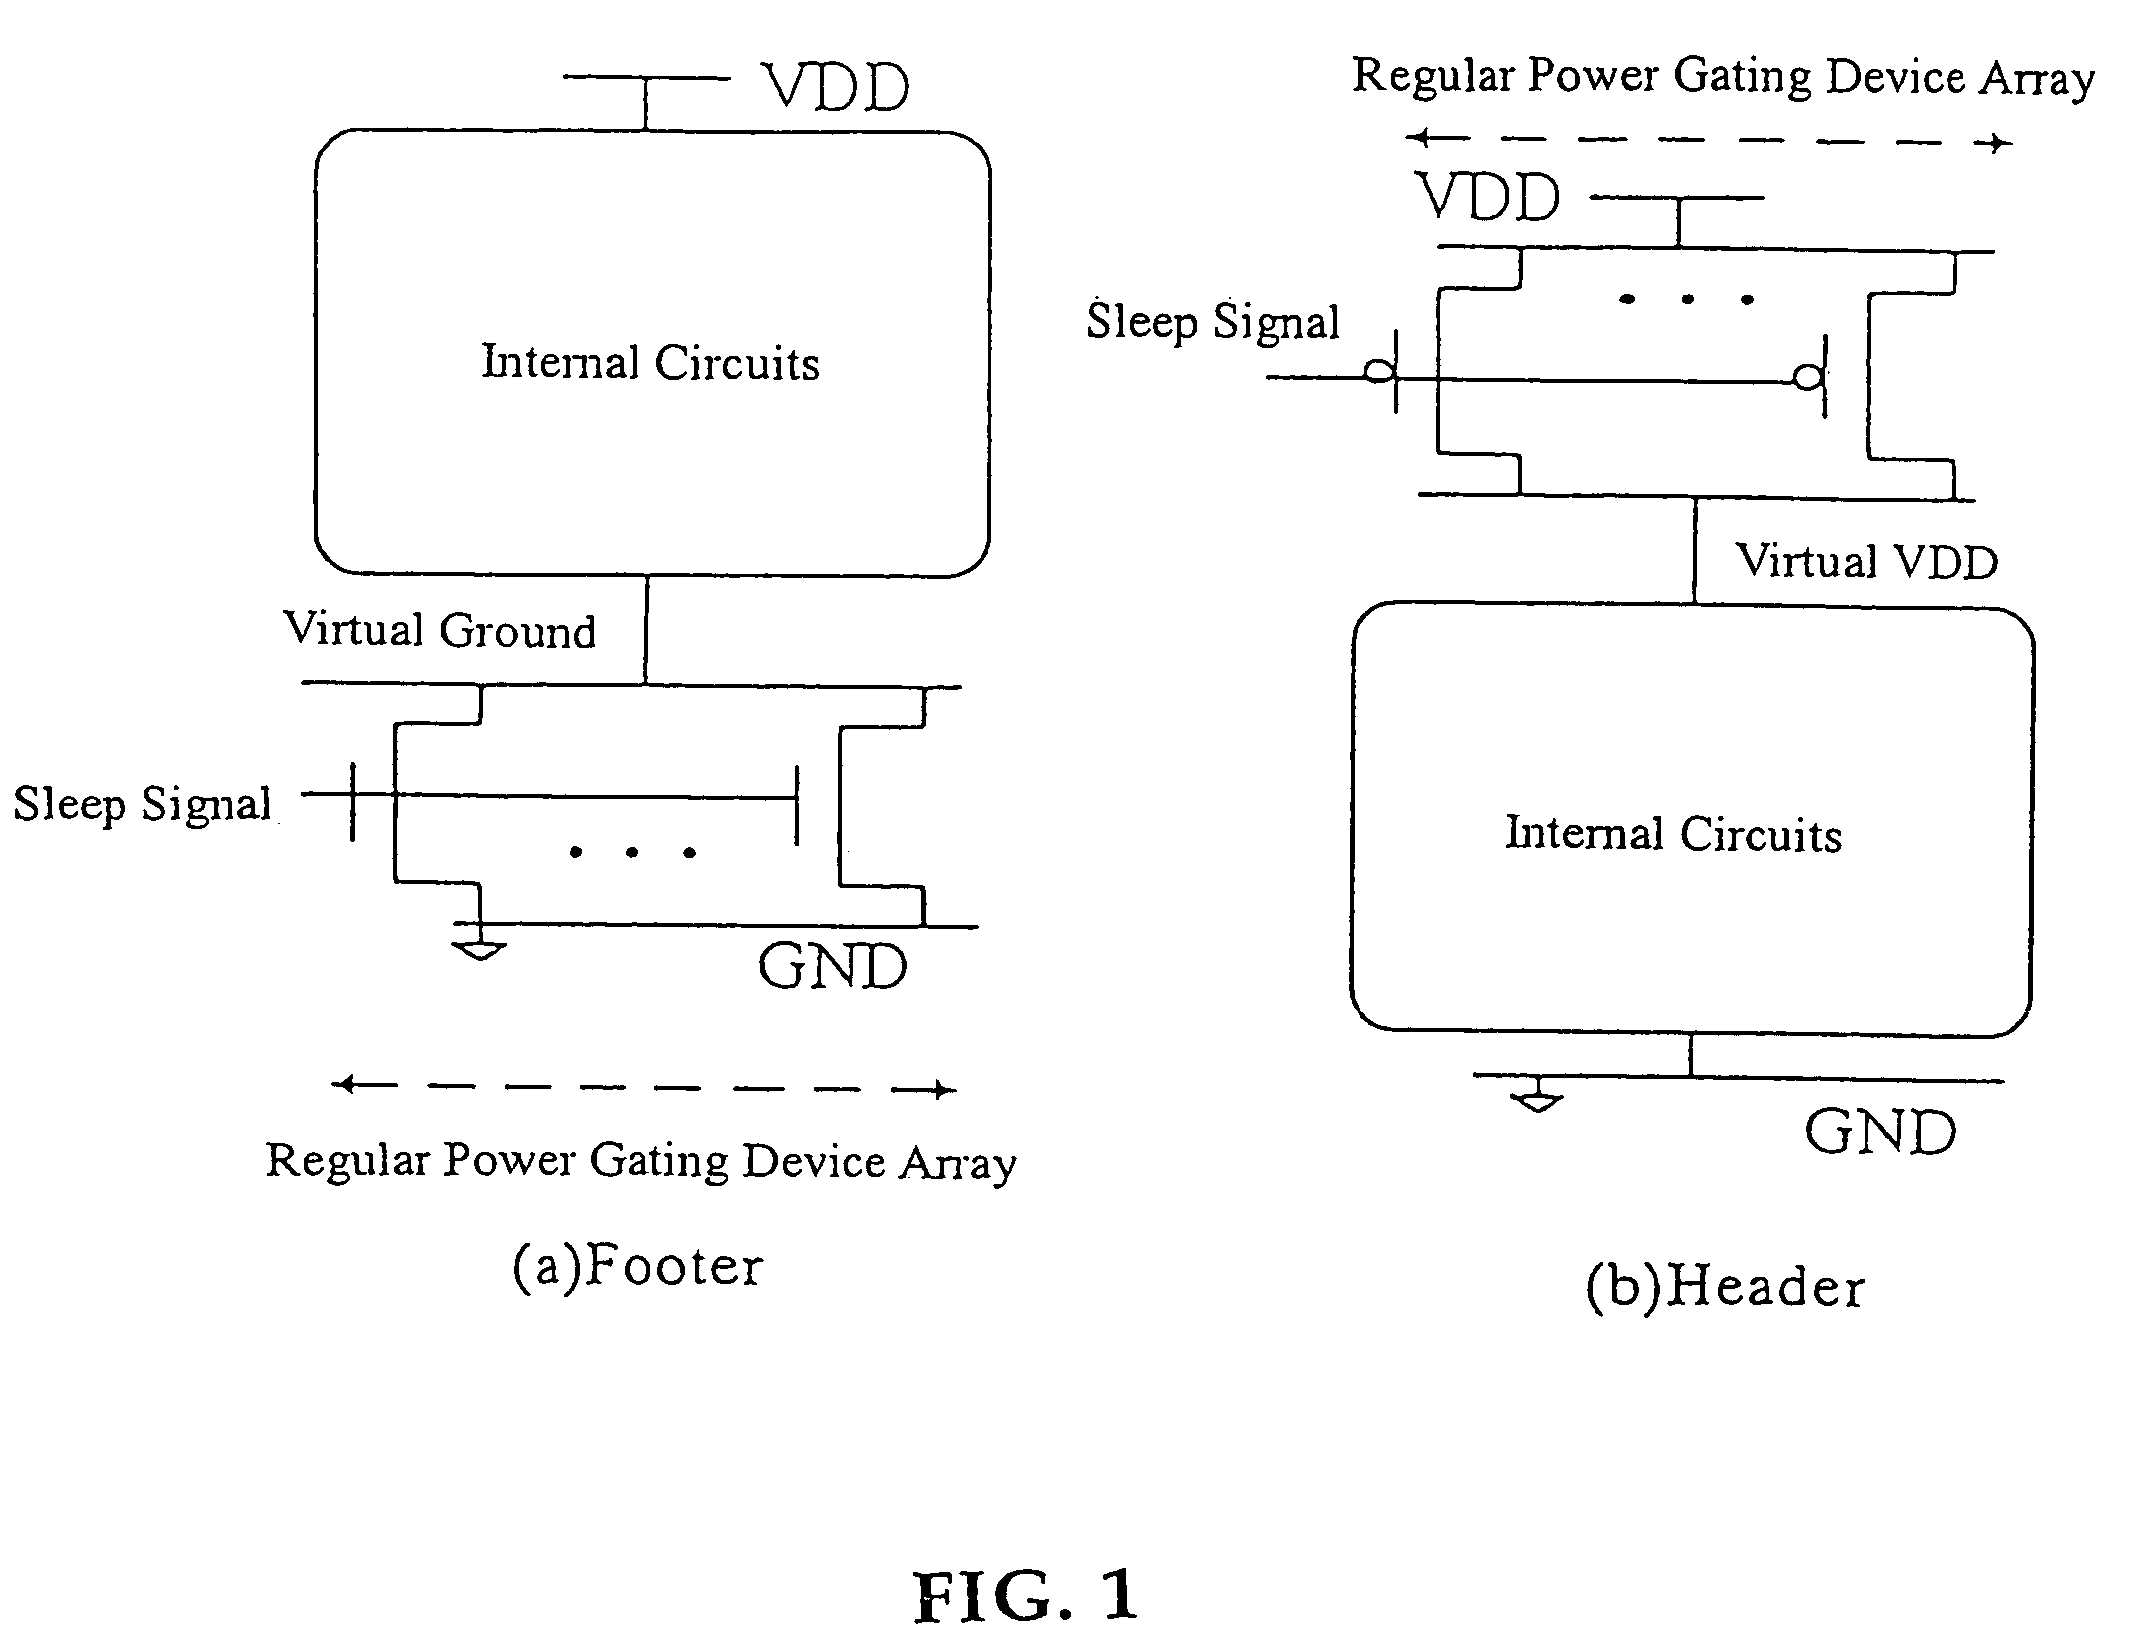 Power gating structure having data retention and intermediate modes